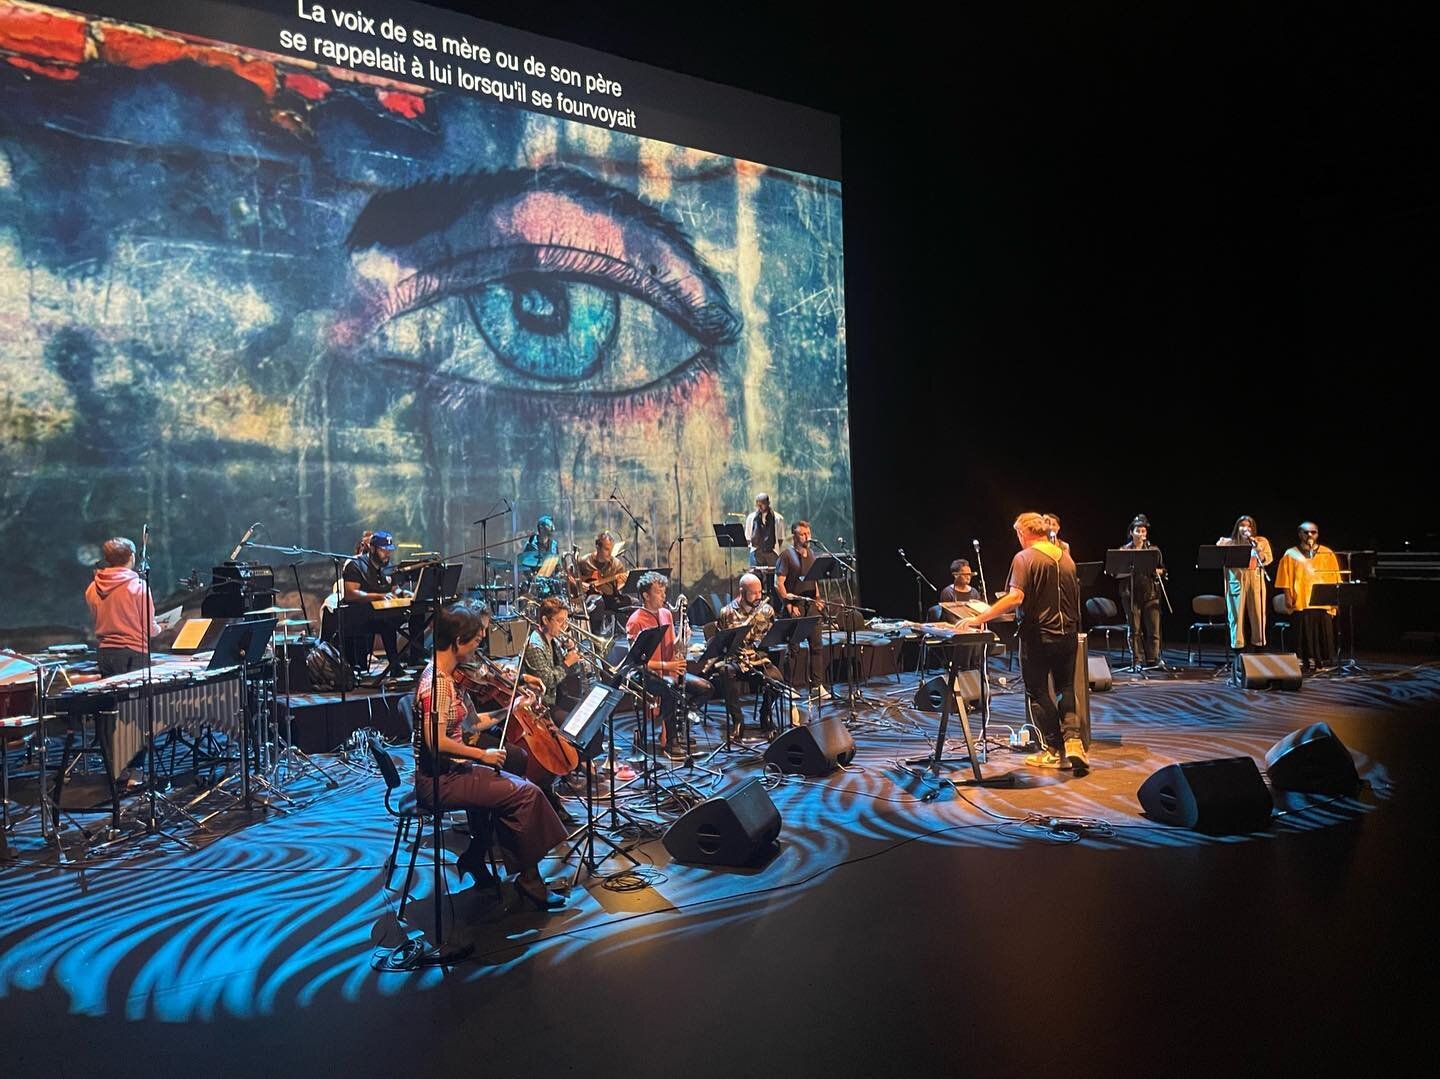 Incredibly successful week of performances at Festival Musica in Strasbourg, as we gave the European premieres of both PLACE (feat. new instrumental arrangement for collective lovemusic by Lucy McKnight and Milo Talwani) and DOROTHEA (my settings of 